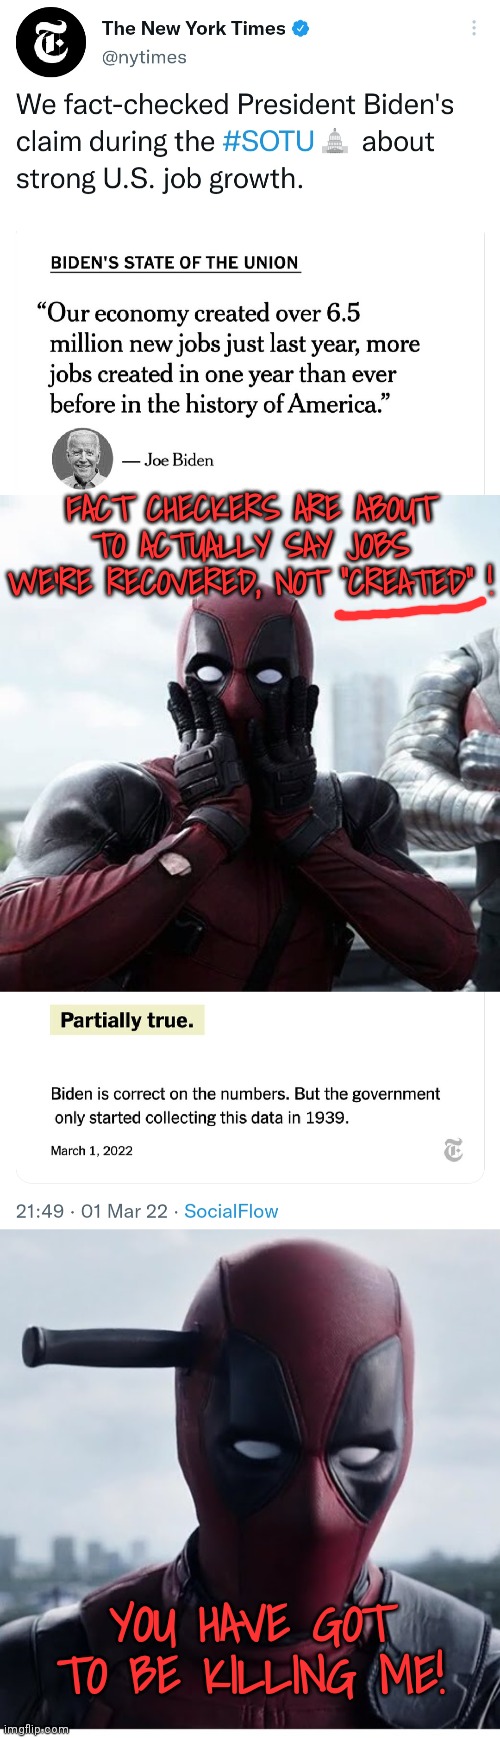 Love the fact checkers | FACT CHECKERS ARE ABOUT TO ACTUALLY SAY JOBS WE'RE RECOVERED, NOT "CREATED" ! YOU HAVE GOT TO BE KILLING ME! | image tagged in memes,deadpool surprised,deadpool knife hs,biden,fact check,democrats | made w/ Imgflip meme maker